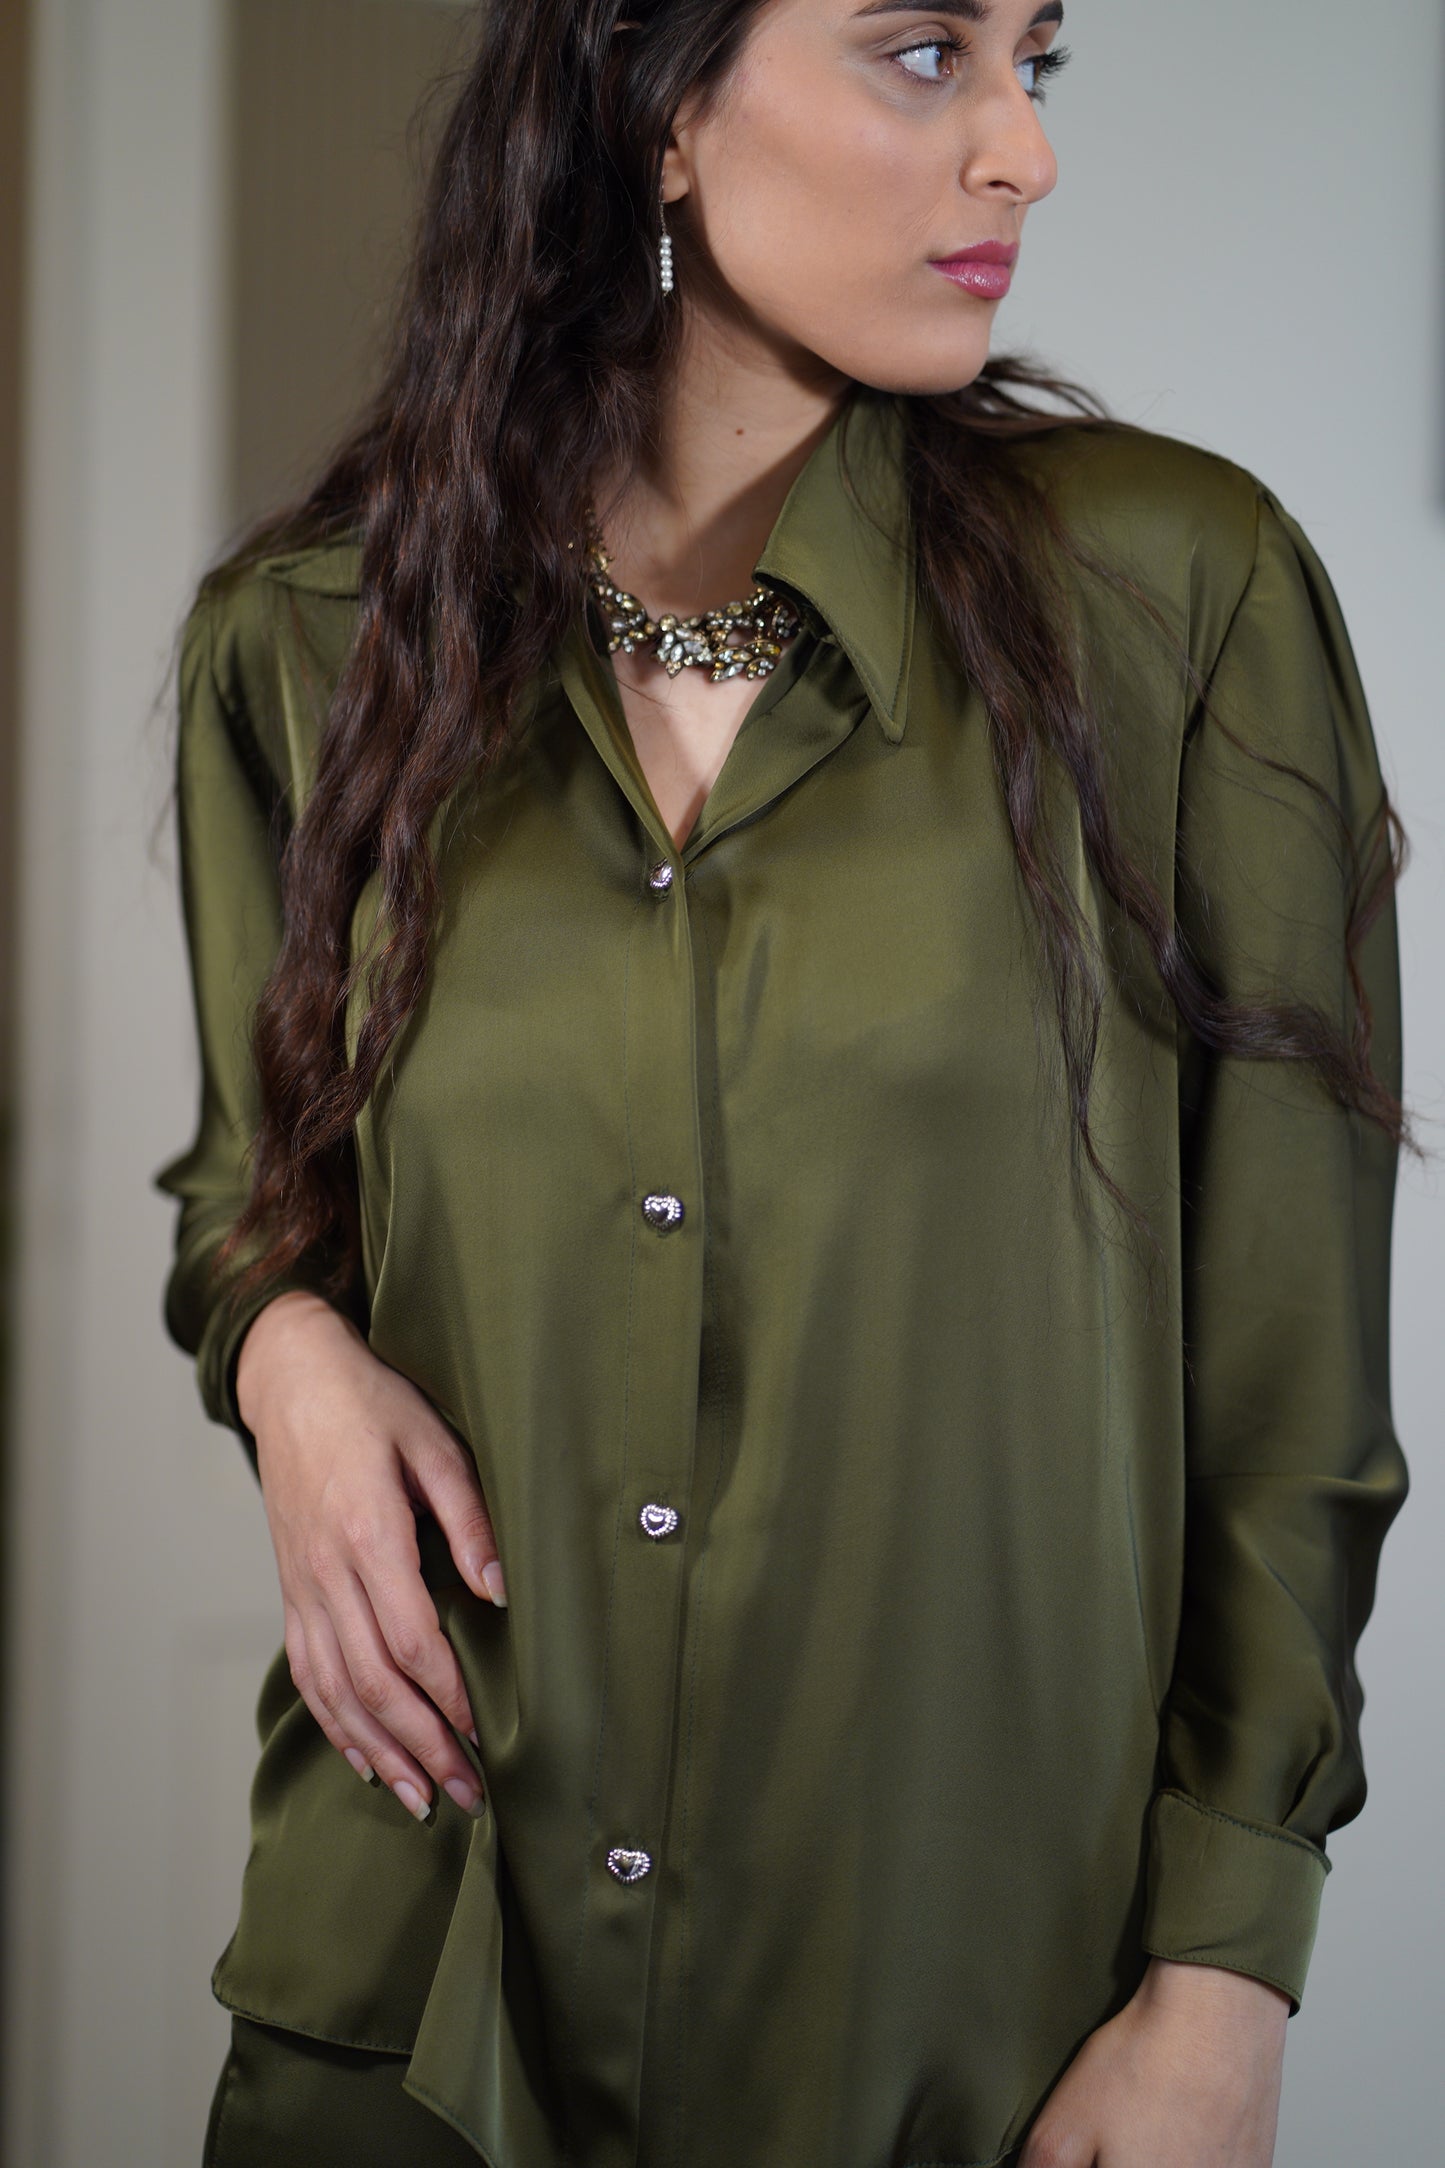 The Satin Button-up in Khaki